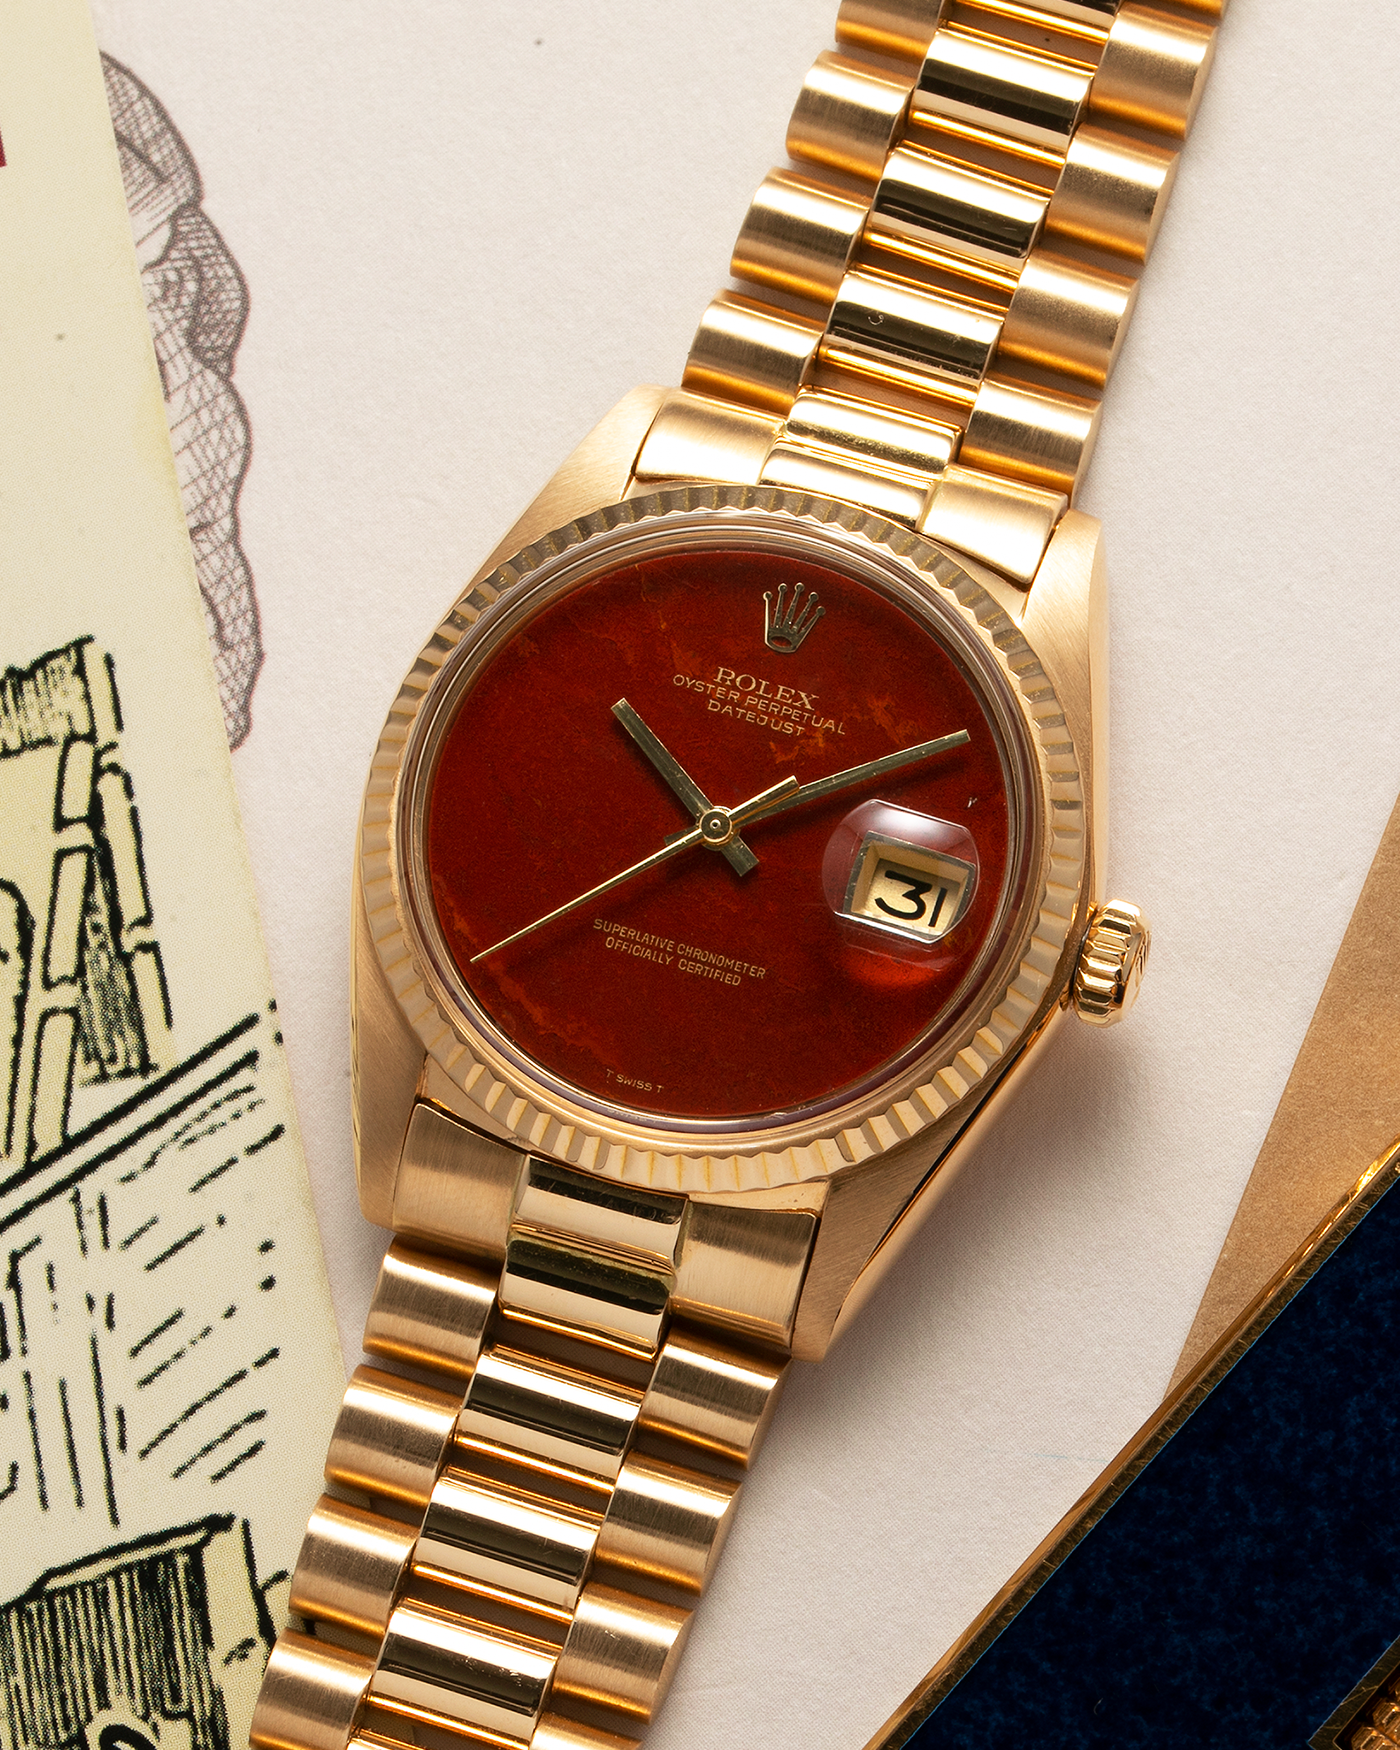 Brand: Rolex Year: 1975 Model: Datejust Reference Number: 1601/8 Serial Number: 392XXXX Material: 18-carat Yellow Gold, Red Jasper Stone Dial Movement: Rolex Cal. 1565, Self-Winding Case Diameter: 36mm Lug Width: 20mm Bracelet: Rolex 18-carat Yellow Gold 8385 Presidential Bracelet with 55B Curved End Links